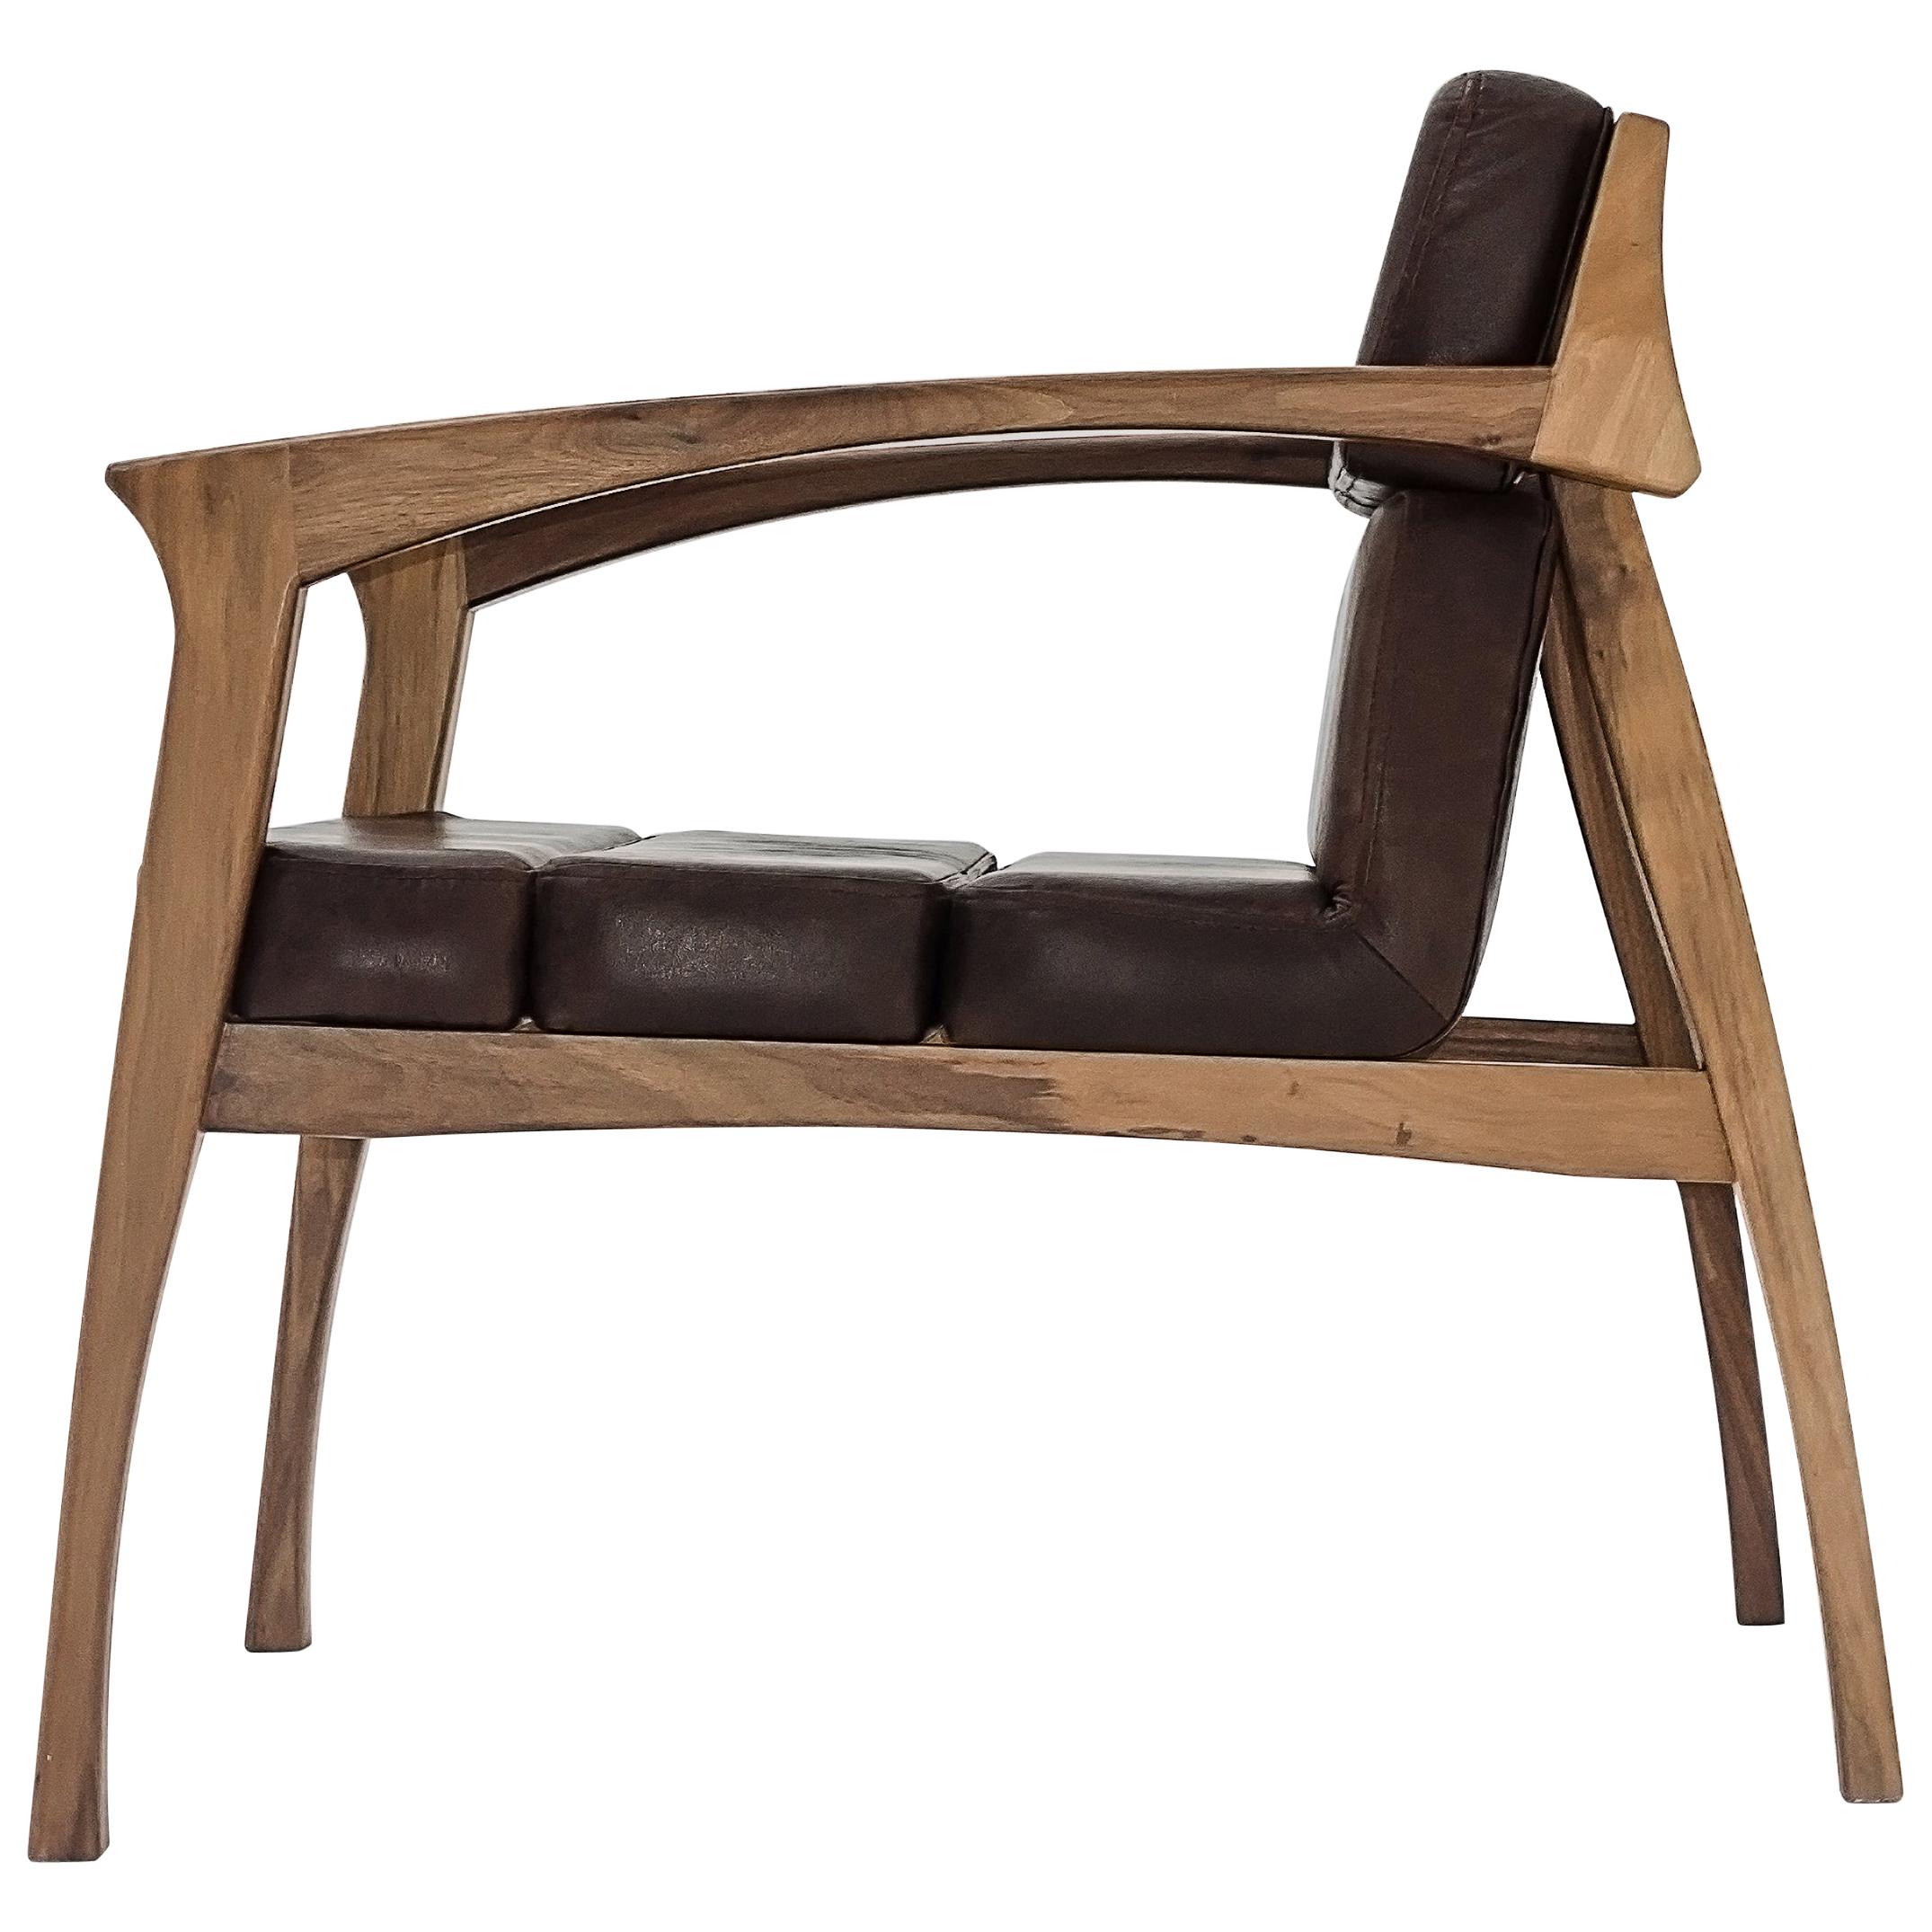 Helmut, Lounge Chair with Leather Upholstered Seats